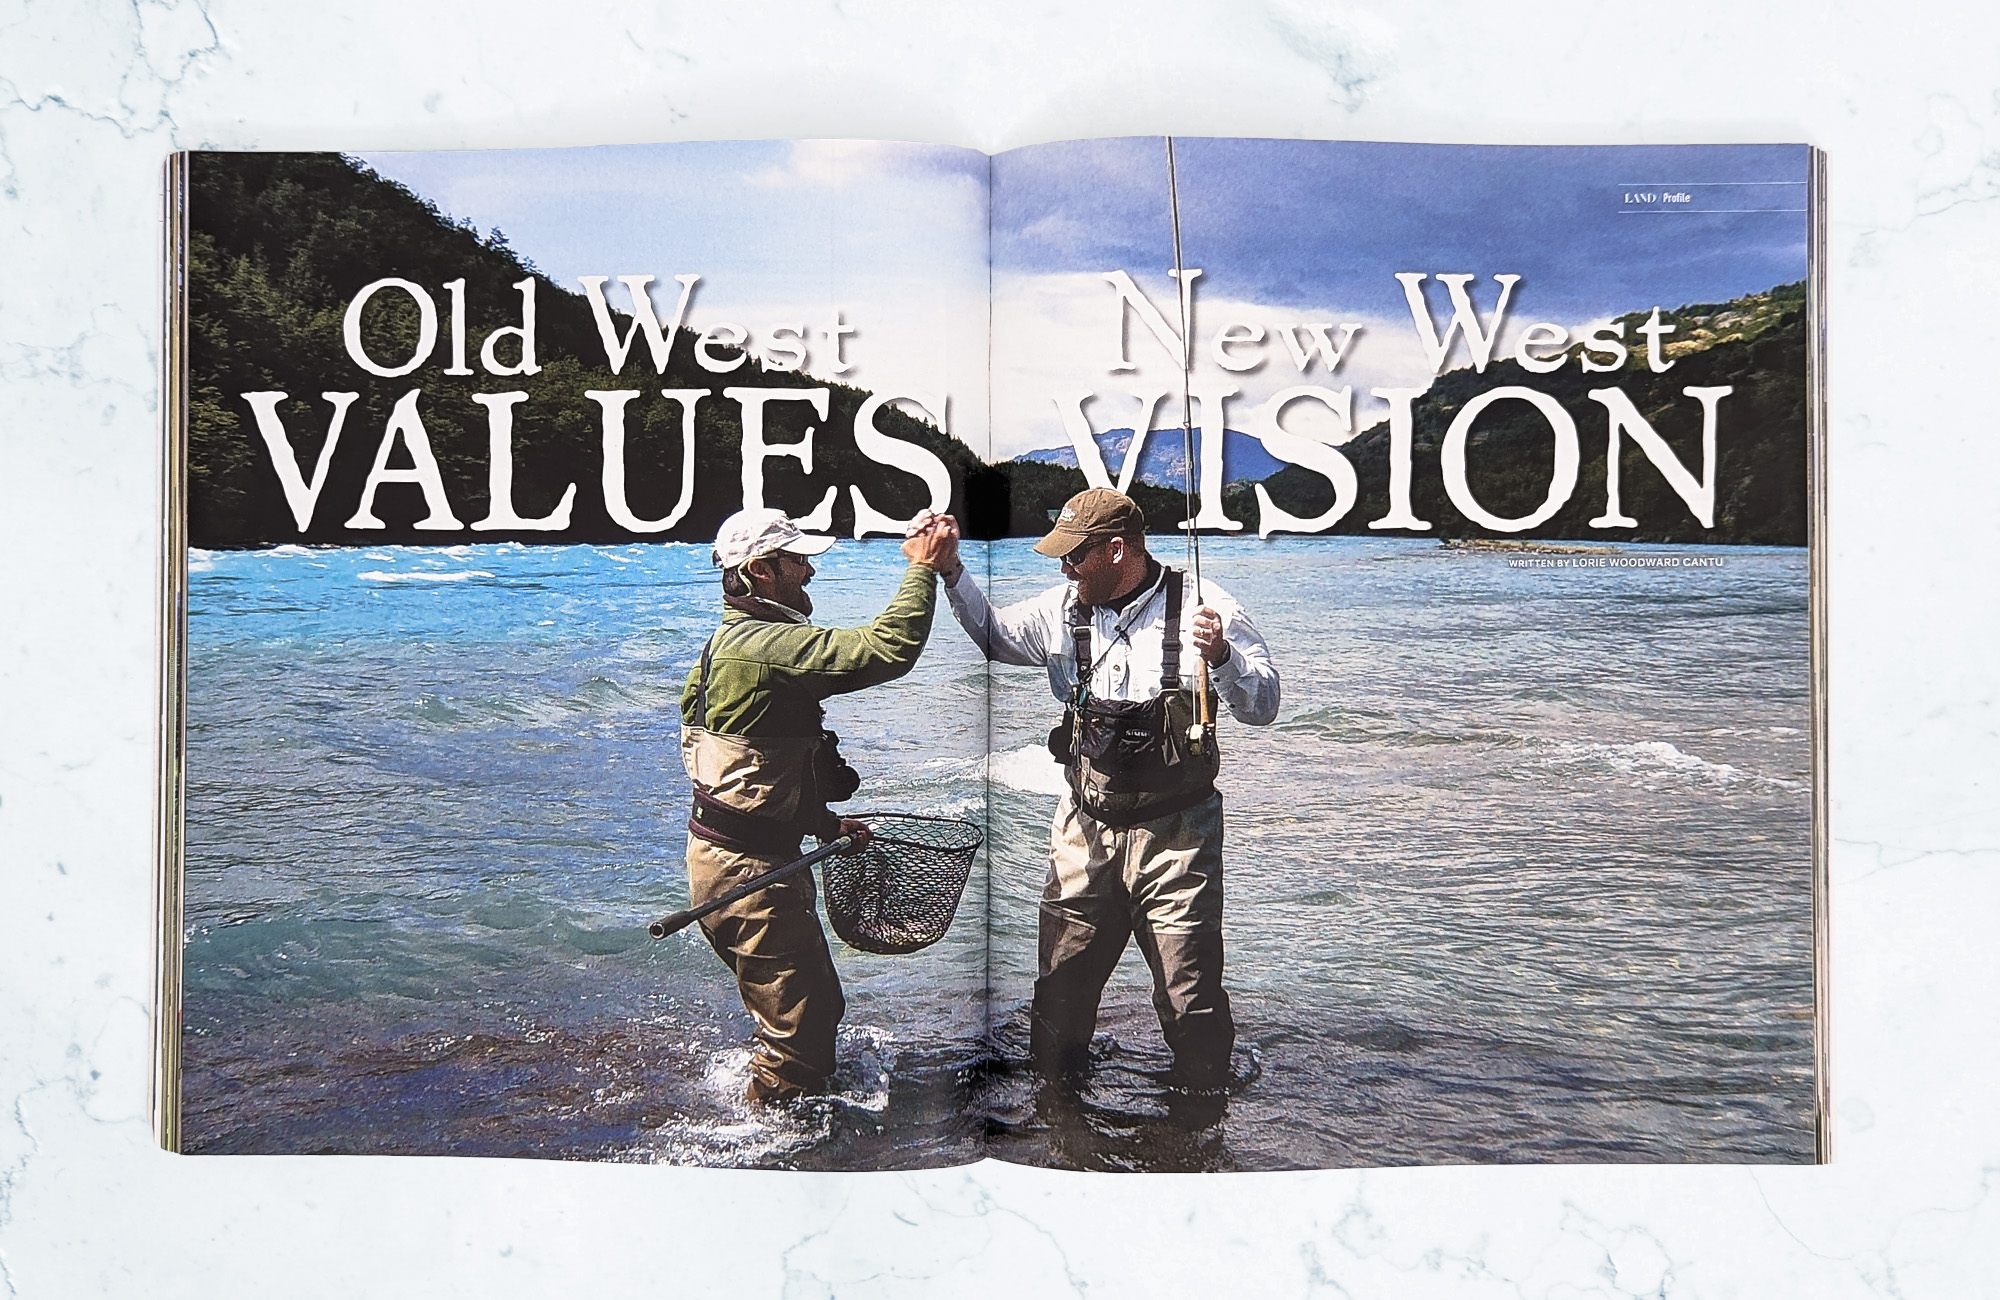 A magazine on a light marbled surface open to a cover spread for an editorial titled Old West Values, New West Vision. A photo takes up the whole spread with two men in knee-deep water clasping hands in the middle. The man on the left is holding a net while the man on the right is holding a fishing pole.